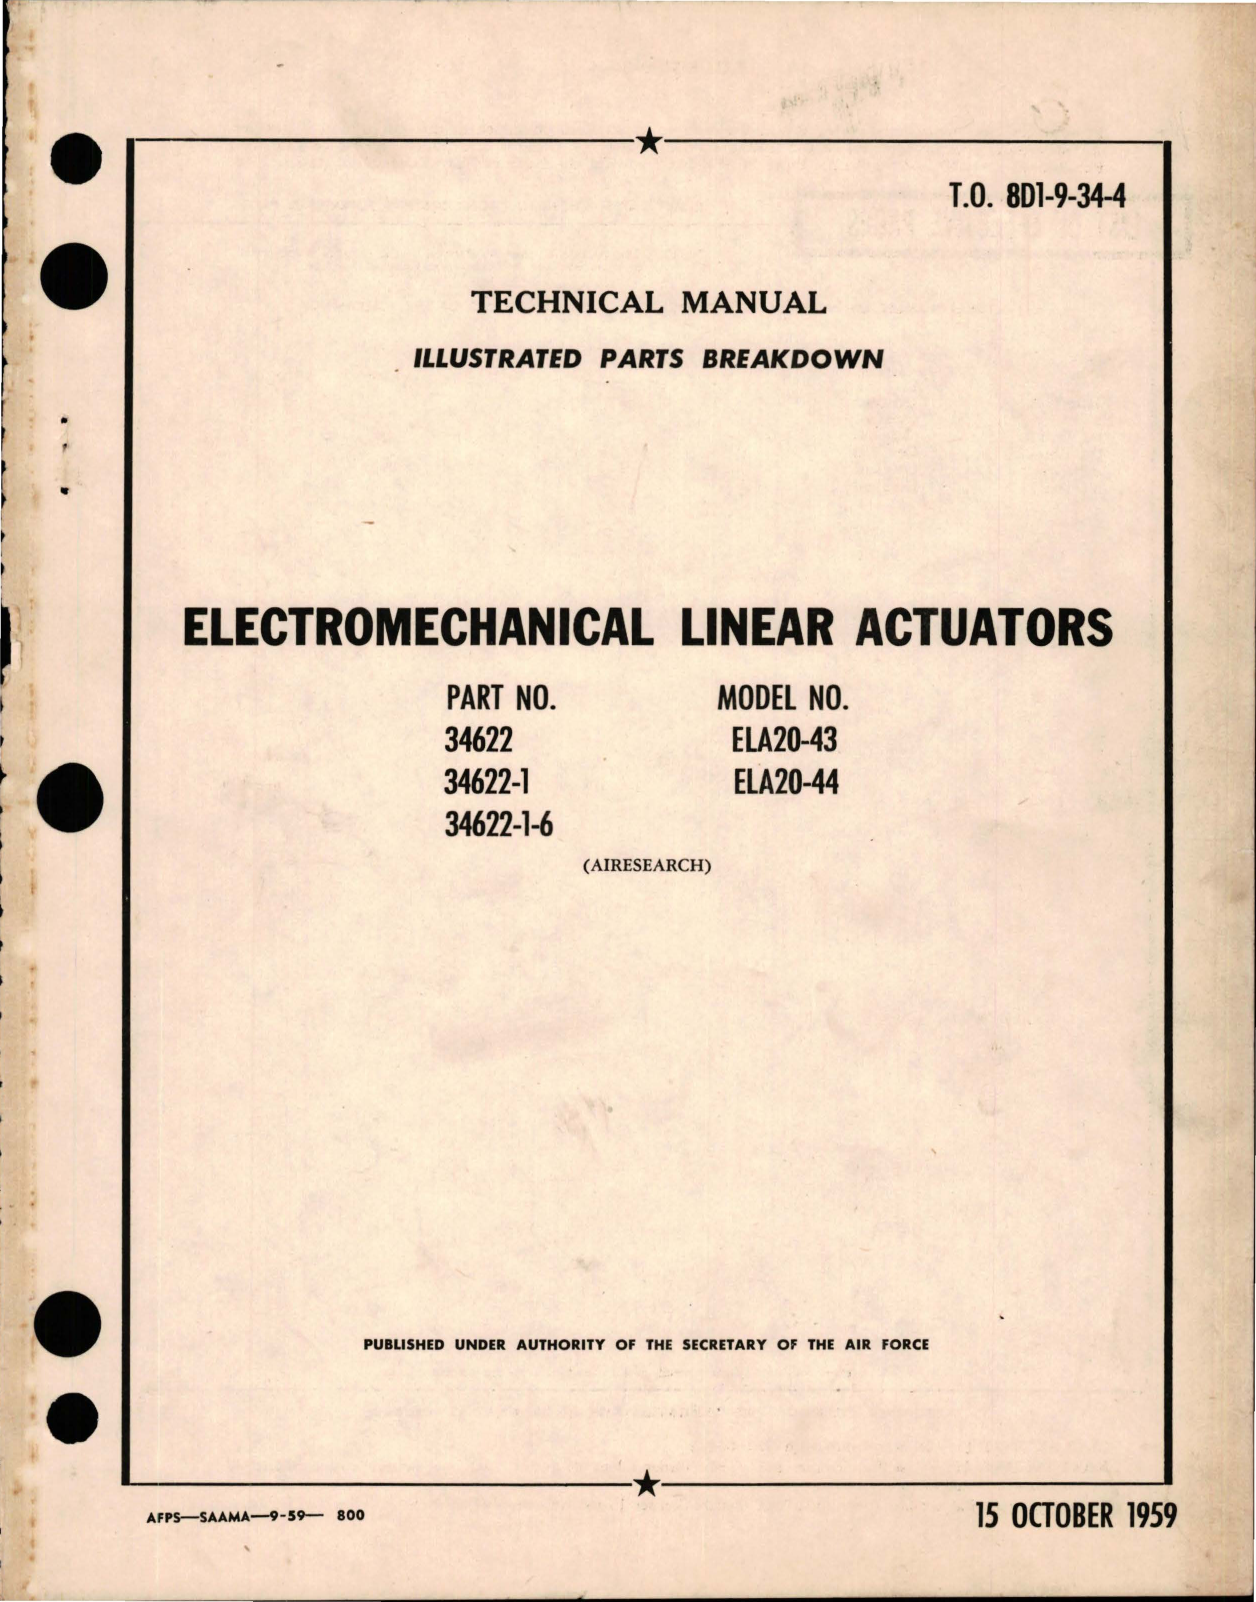 Sample page 1 from AirCorps Library document: Illustrated Parts Breakdown for Electromechanical Linear Actuators - Parts 34622, 34622-1, and 34622-1-6 - Models ELA20-43 and ELA20-44